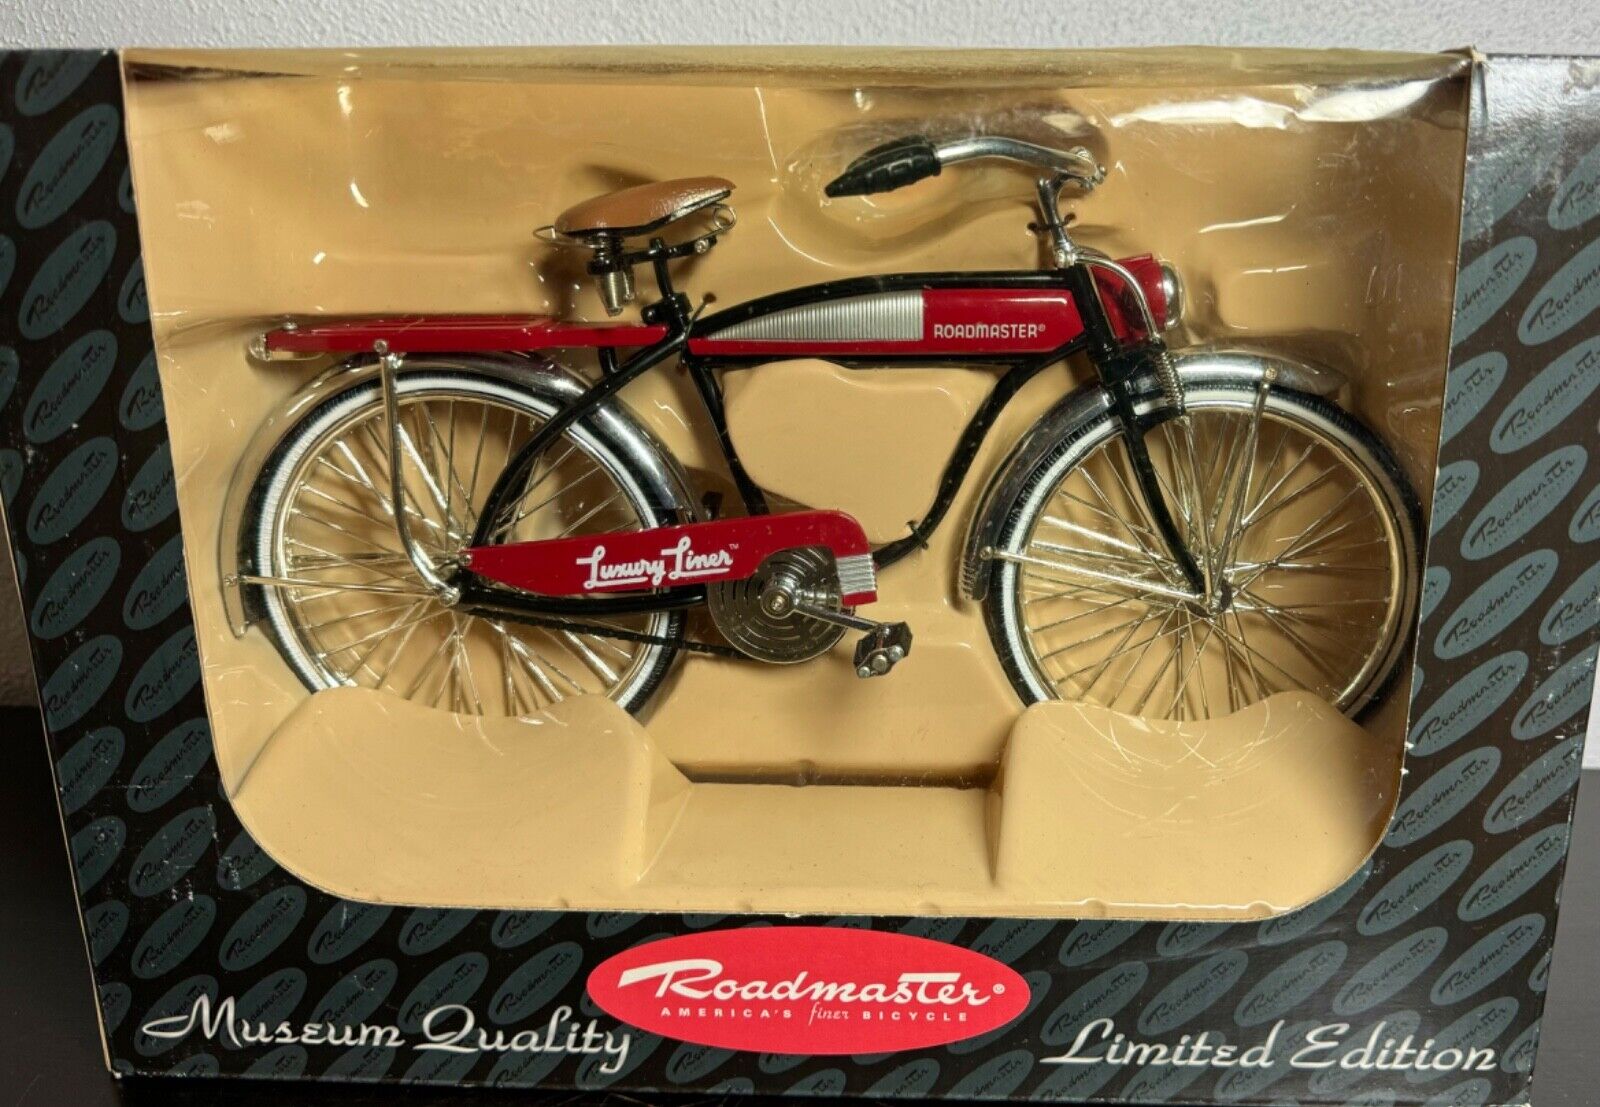 Limited Edition 1:6 scale, Roadmaster luxury liner model bicycle, NIB 1998